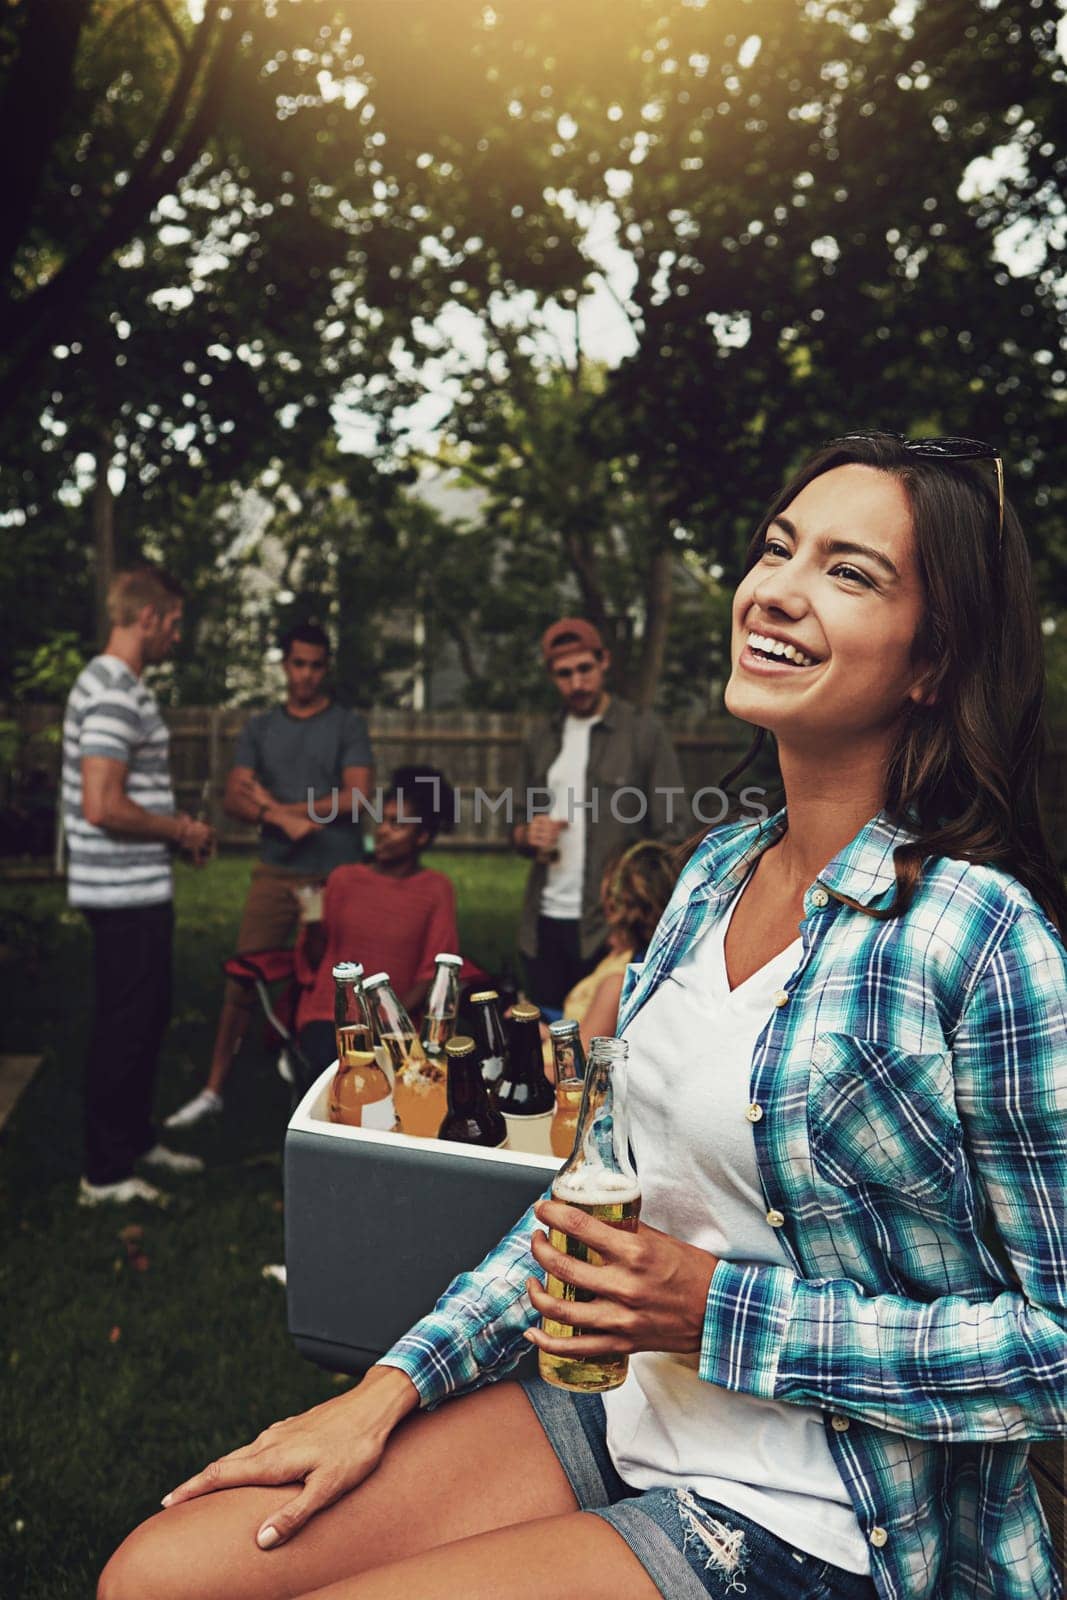 Shes really enjoying herself. a young woman enjoying a party with friends outdoors